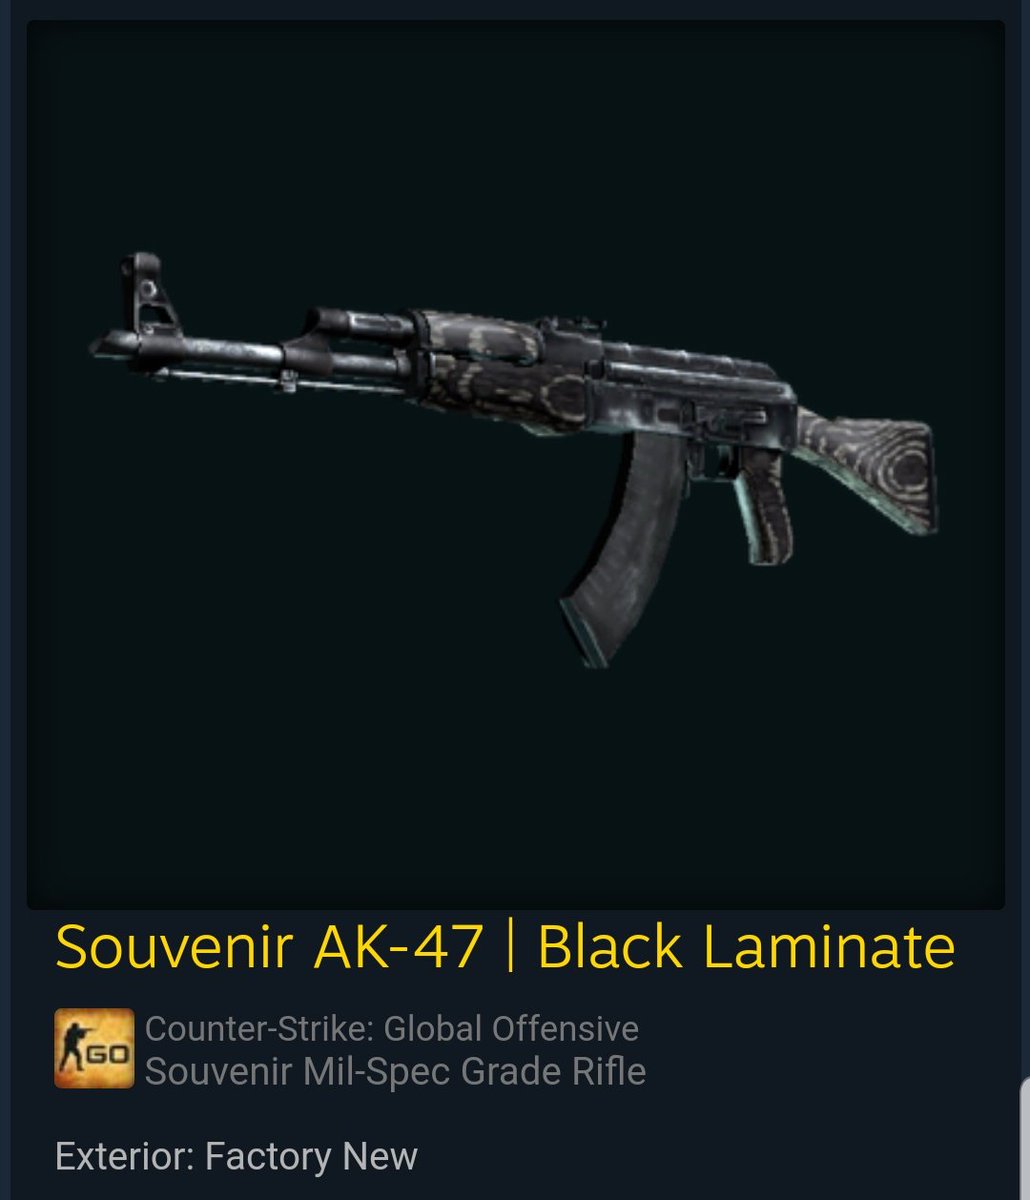 Ohnepixel On Twitter Souvenir Ak 47 Black Laminate 20 Days After It Started Dropping Highest Sale Price 660 Souvenir Non 30 Higher Current Supply 2 346 Fns 22 Https T Co Pheekvxgb3